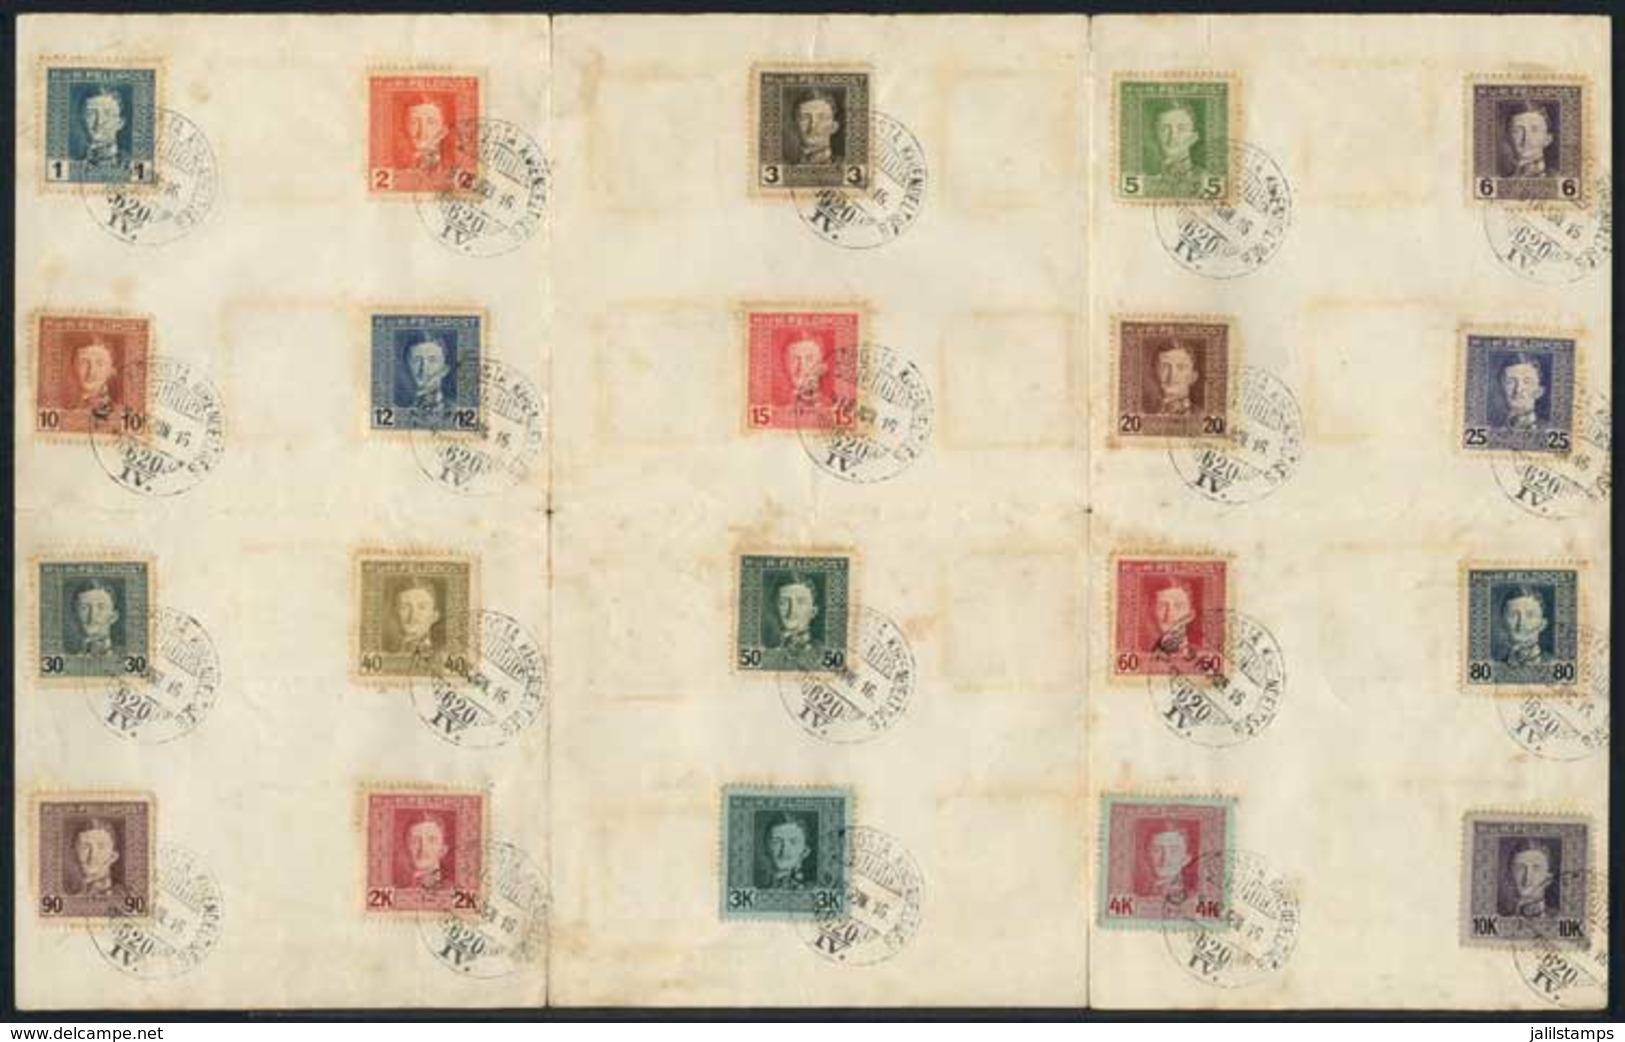 AUSTRIA-HUNGARY: Sc.M49/68, Complete Set Of 20 Values On A Sheet With Cancel Of 16/JUN/1918, Fine Quality, Interesting! - Oblitérés